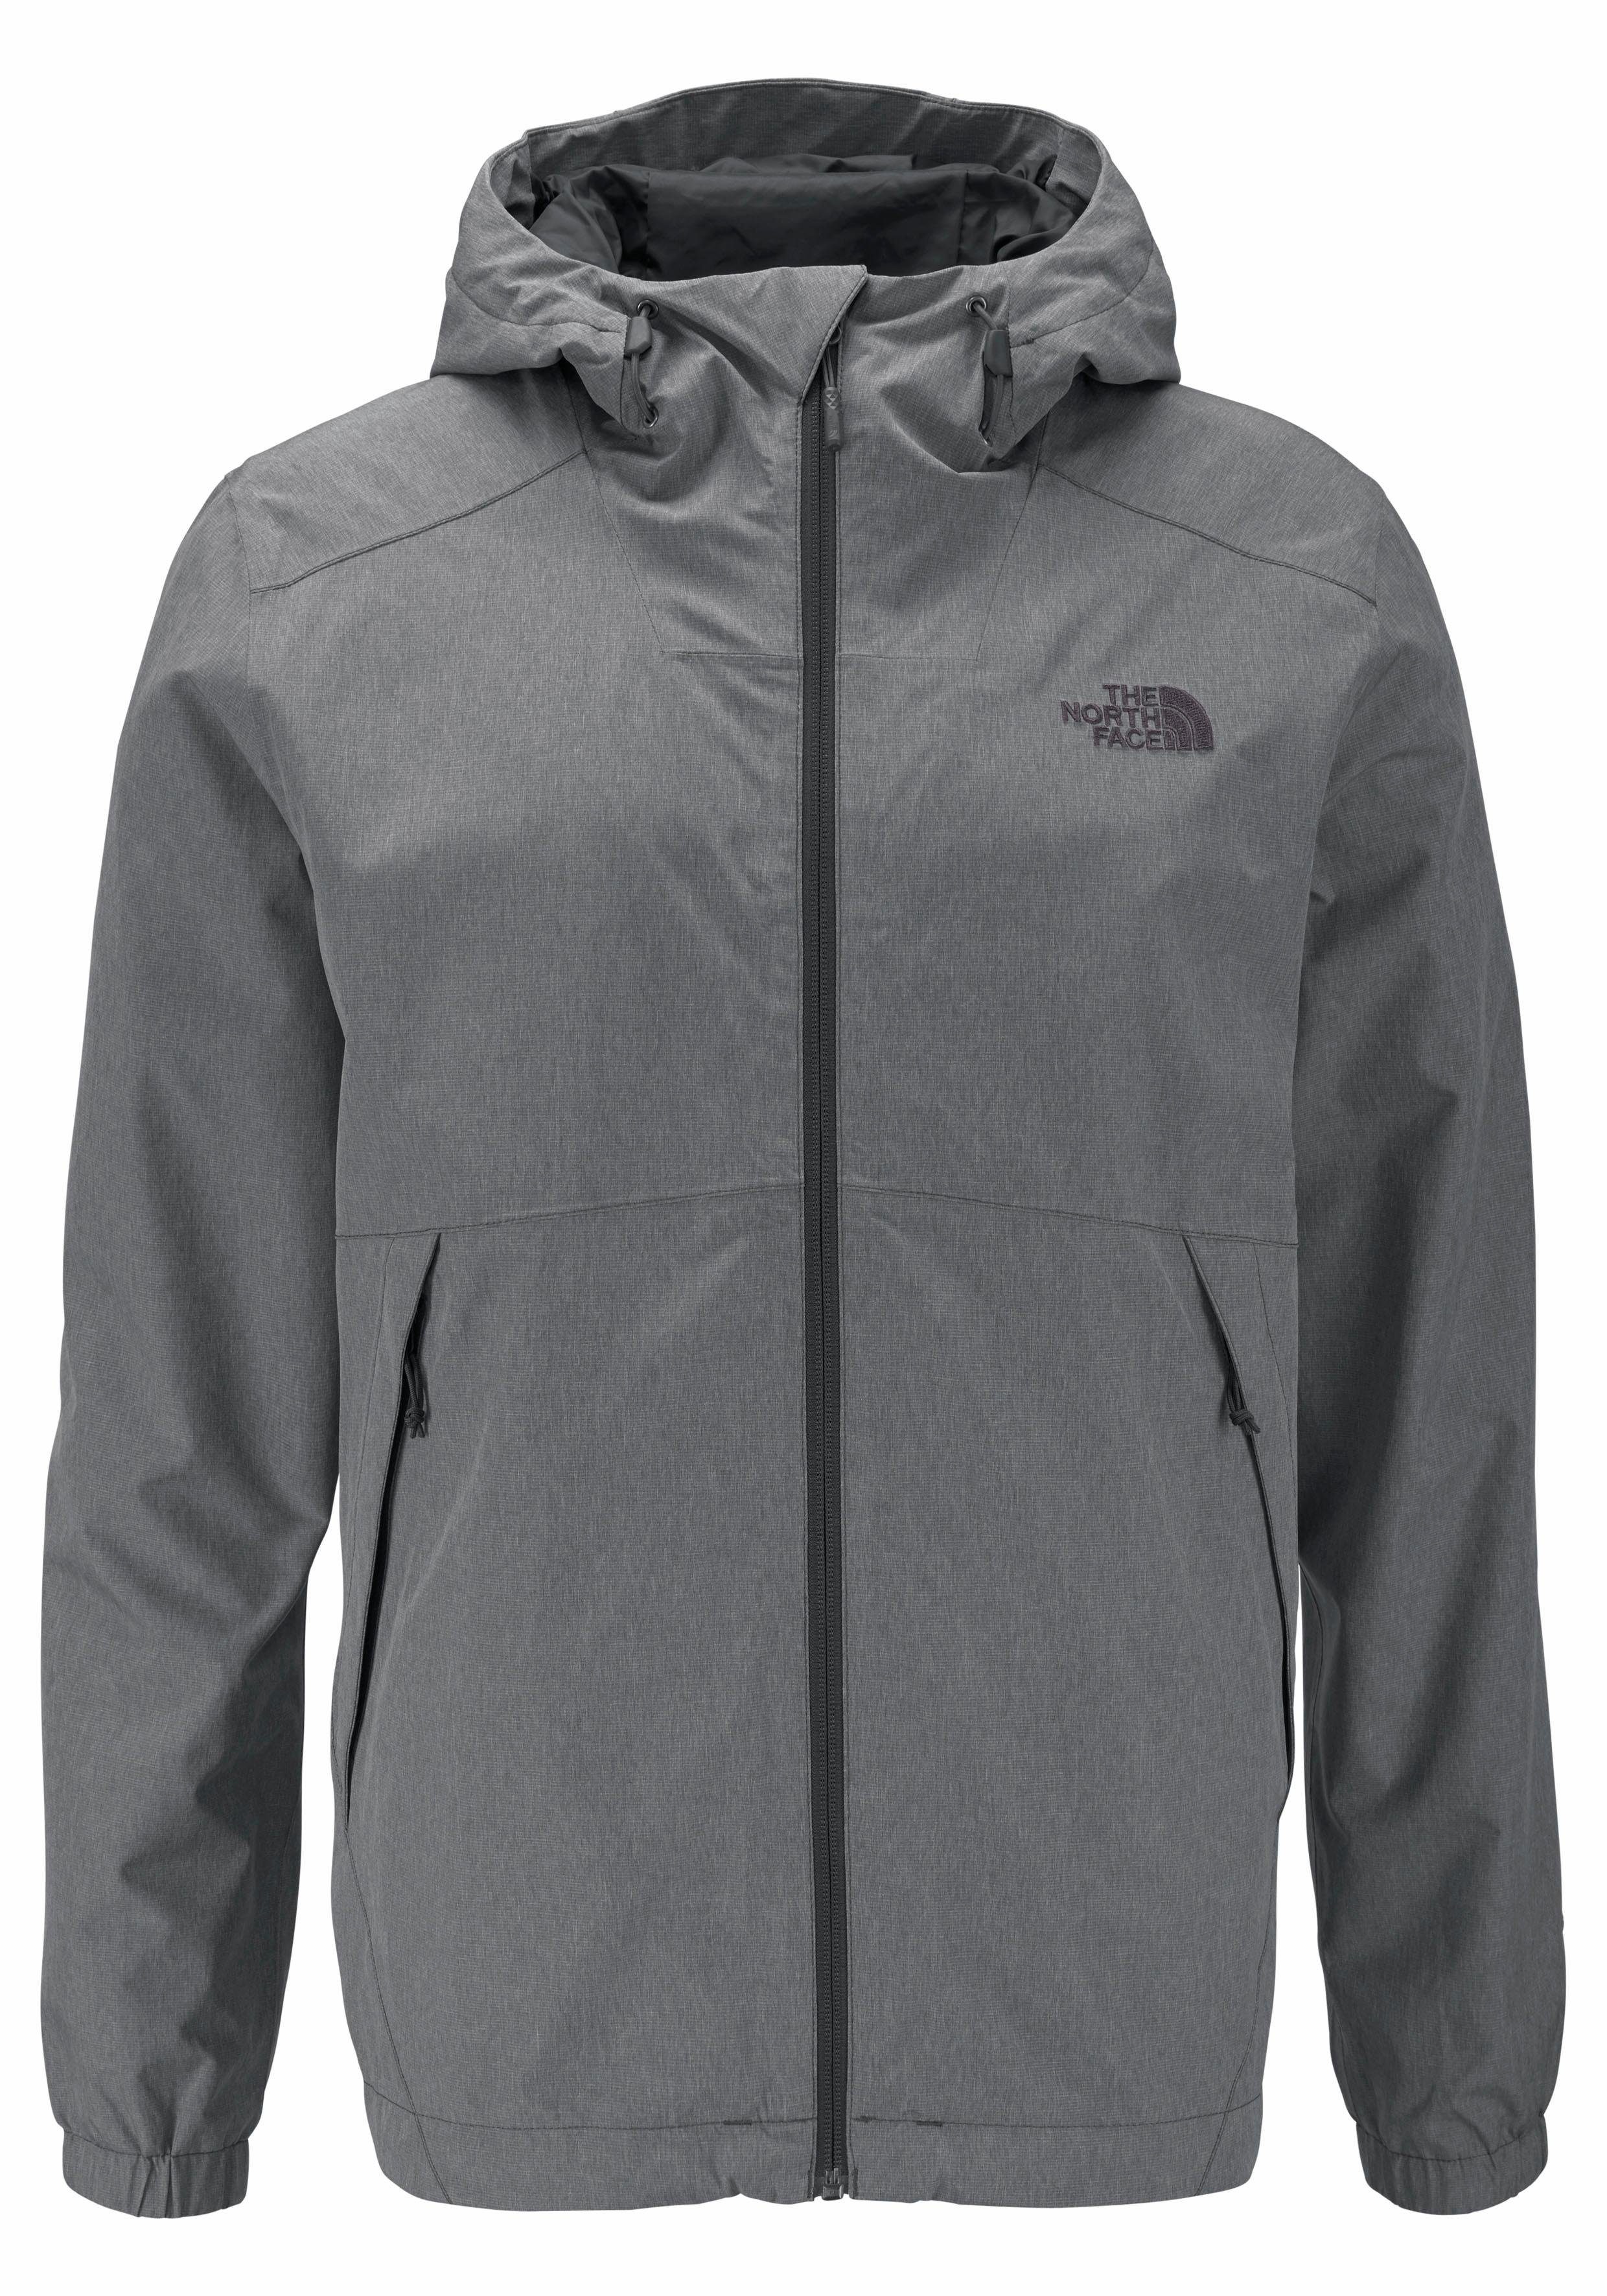 Otto - The North Face NU 15% KORTING: The North Face regenjack MILLERTON